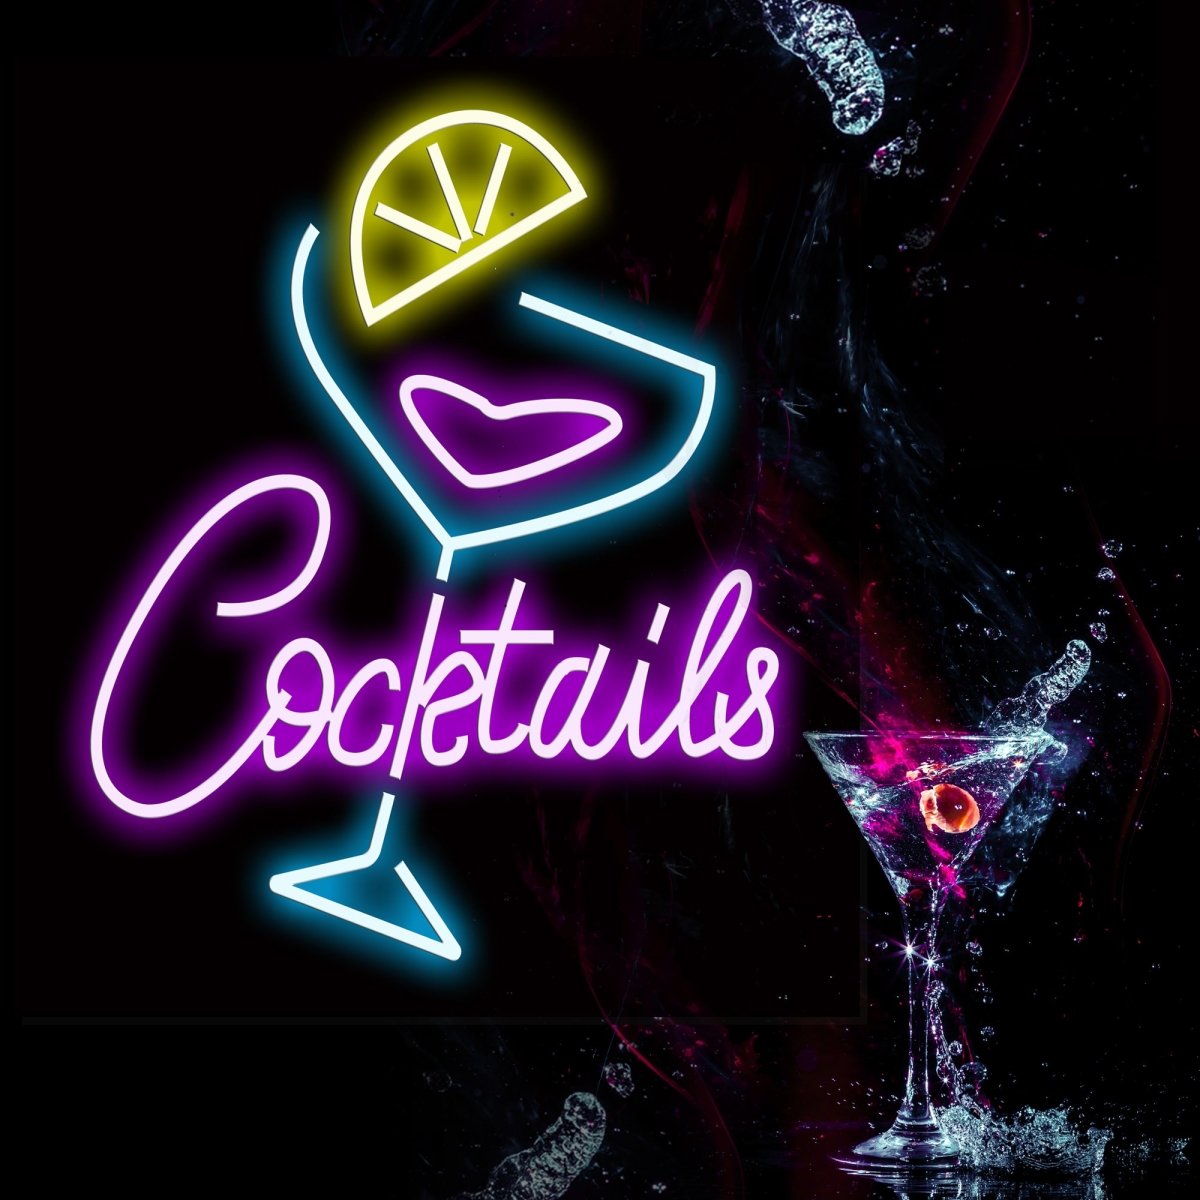 Personalised LED Neon Sign COCKTAIL 2 - madaboutneon